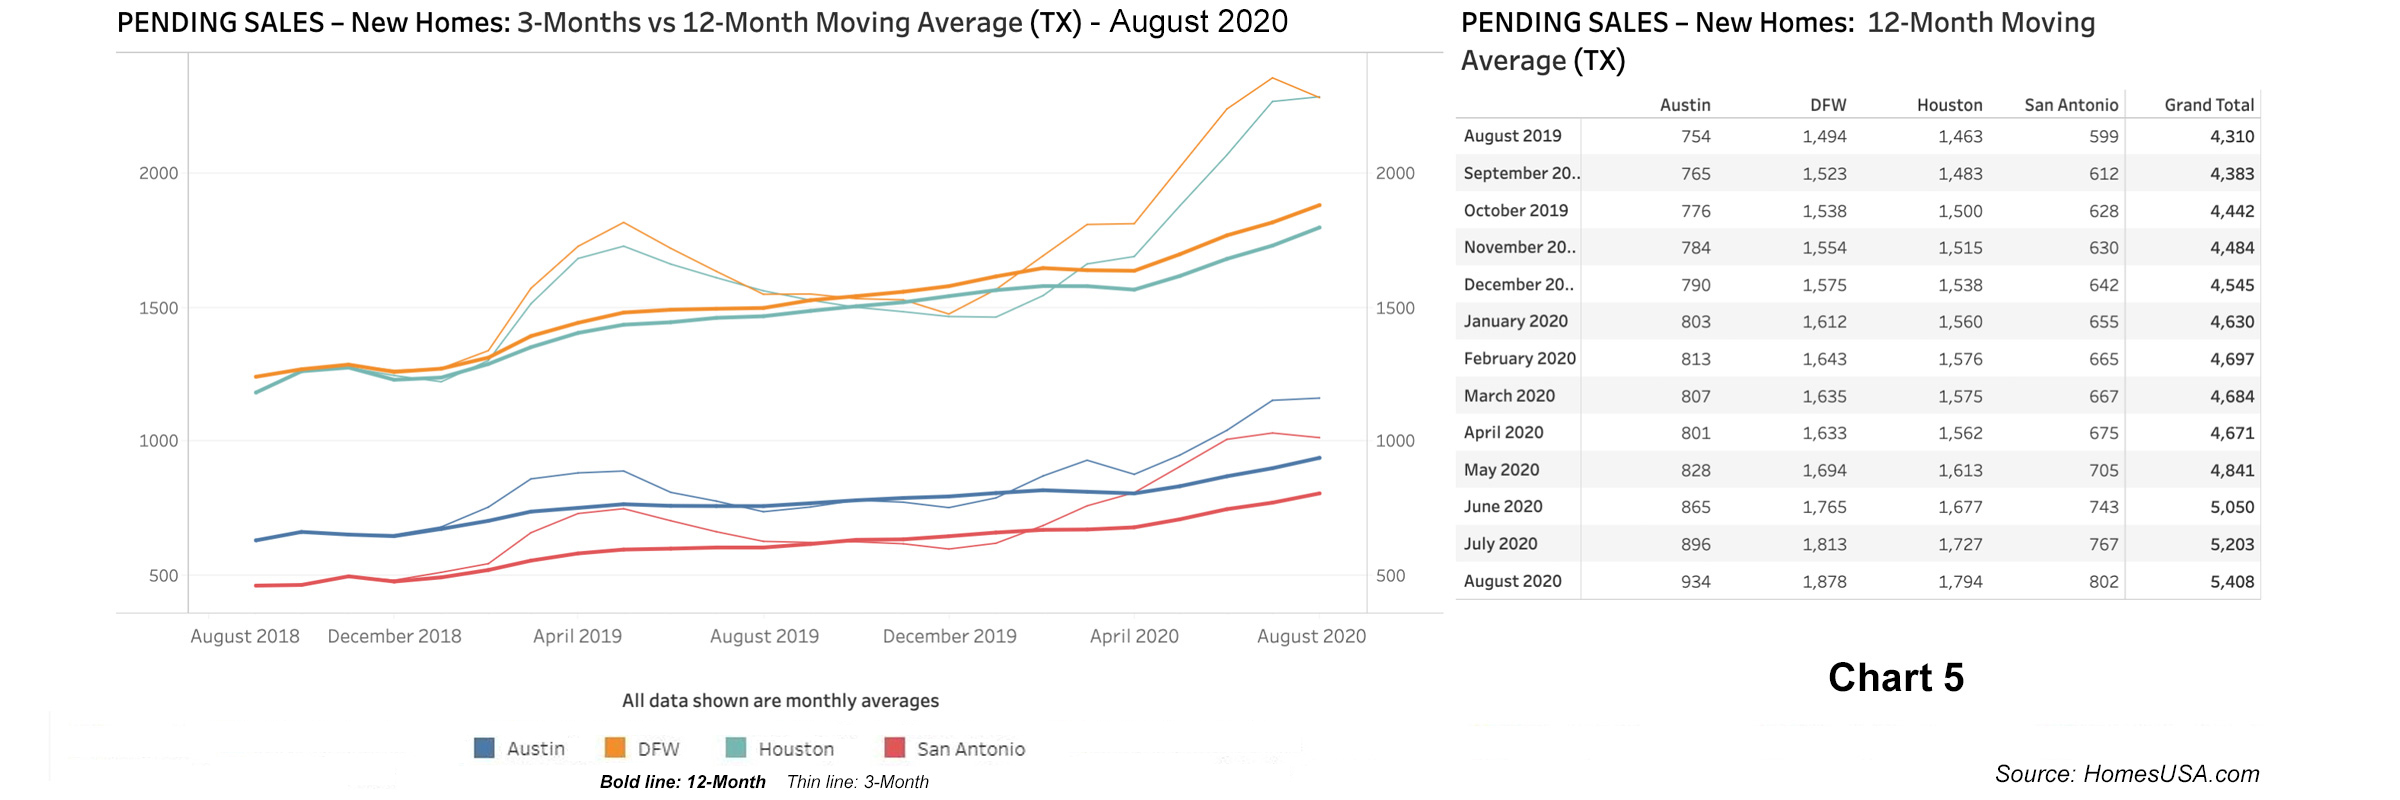 Chart 5: Texas Pending New Homes Sales - August 2020